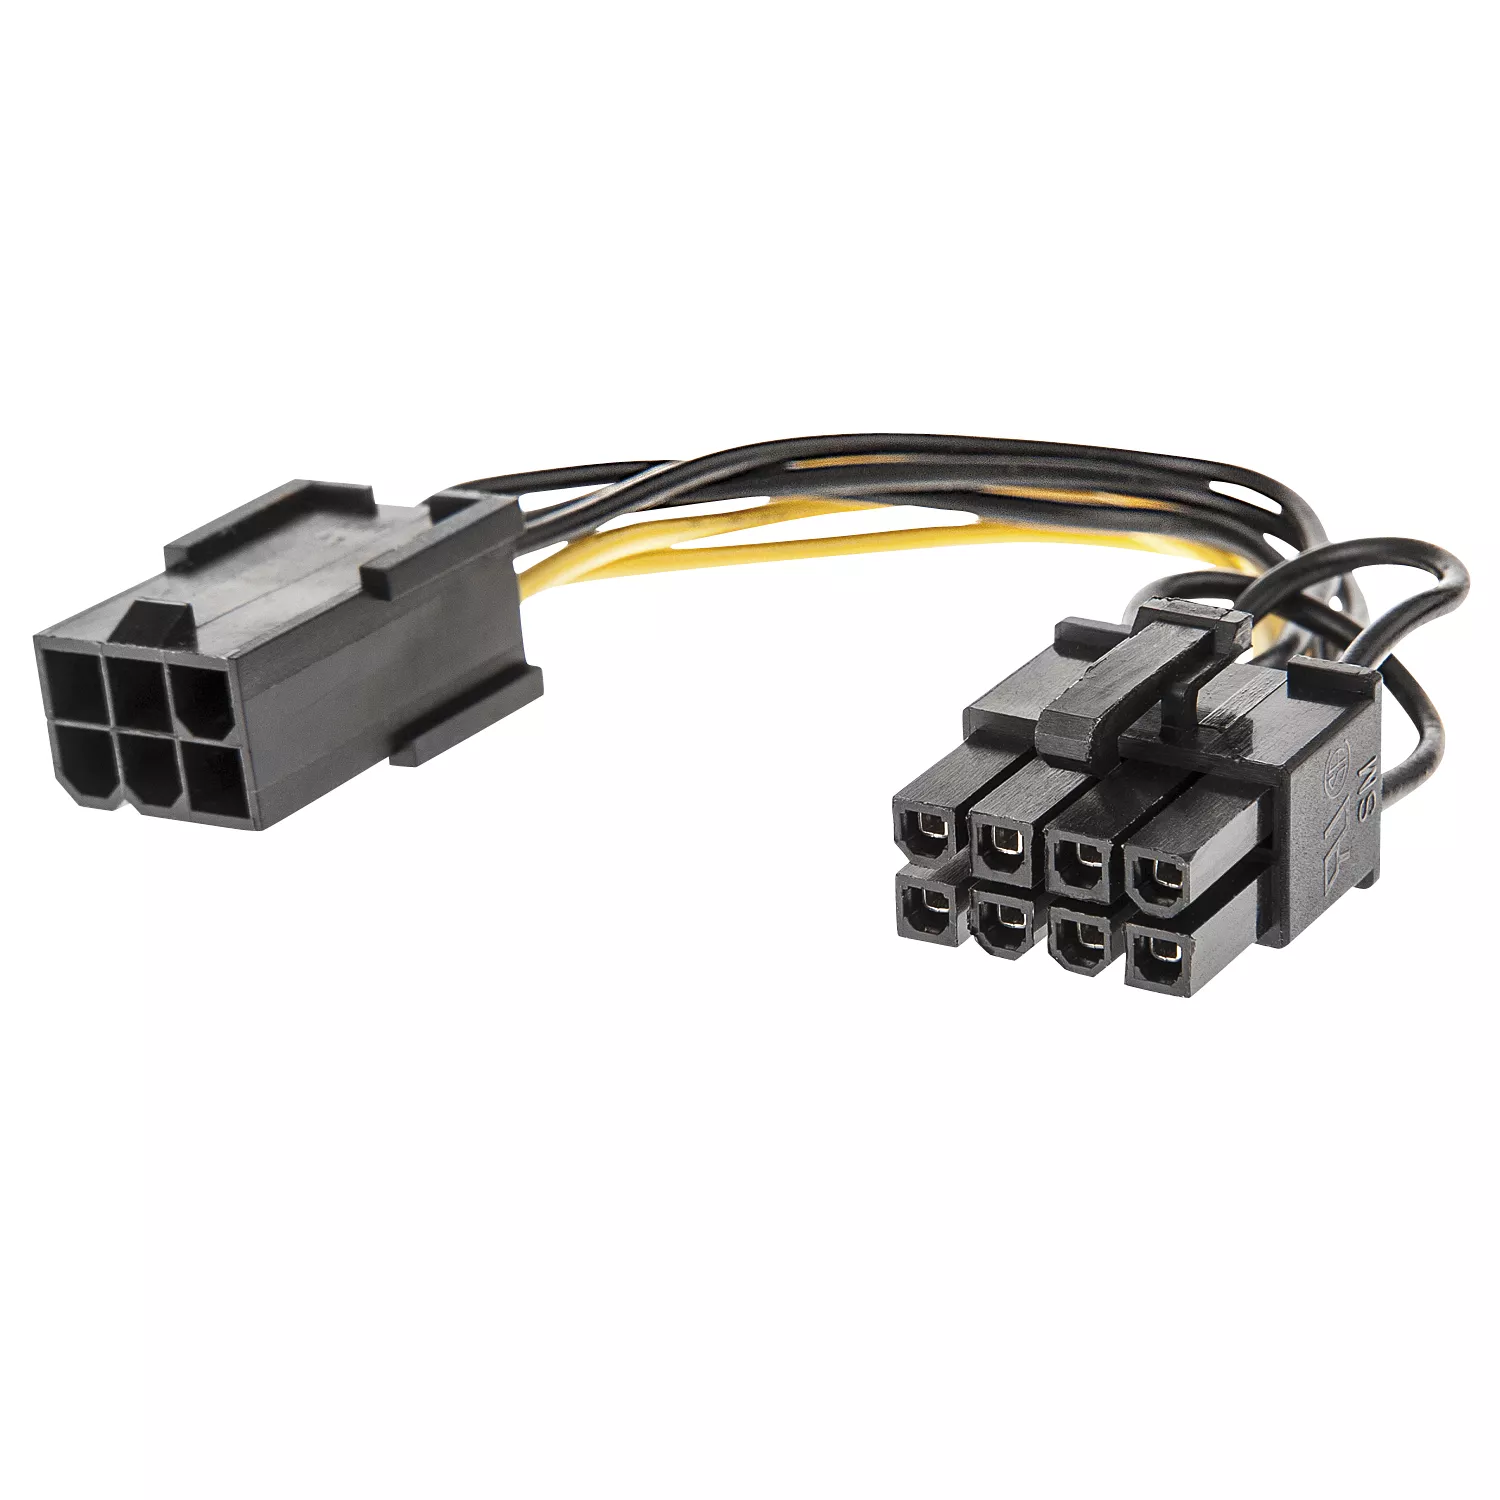 Vente Accessoire composant LINDY 2x 6 pin F to 6 pin M PCIe Power Adapter Length 0 sur hello RSE